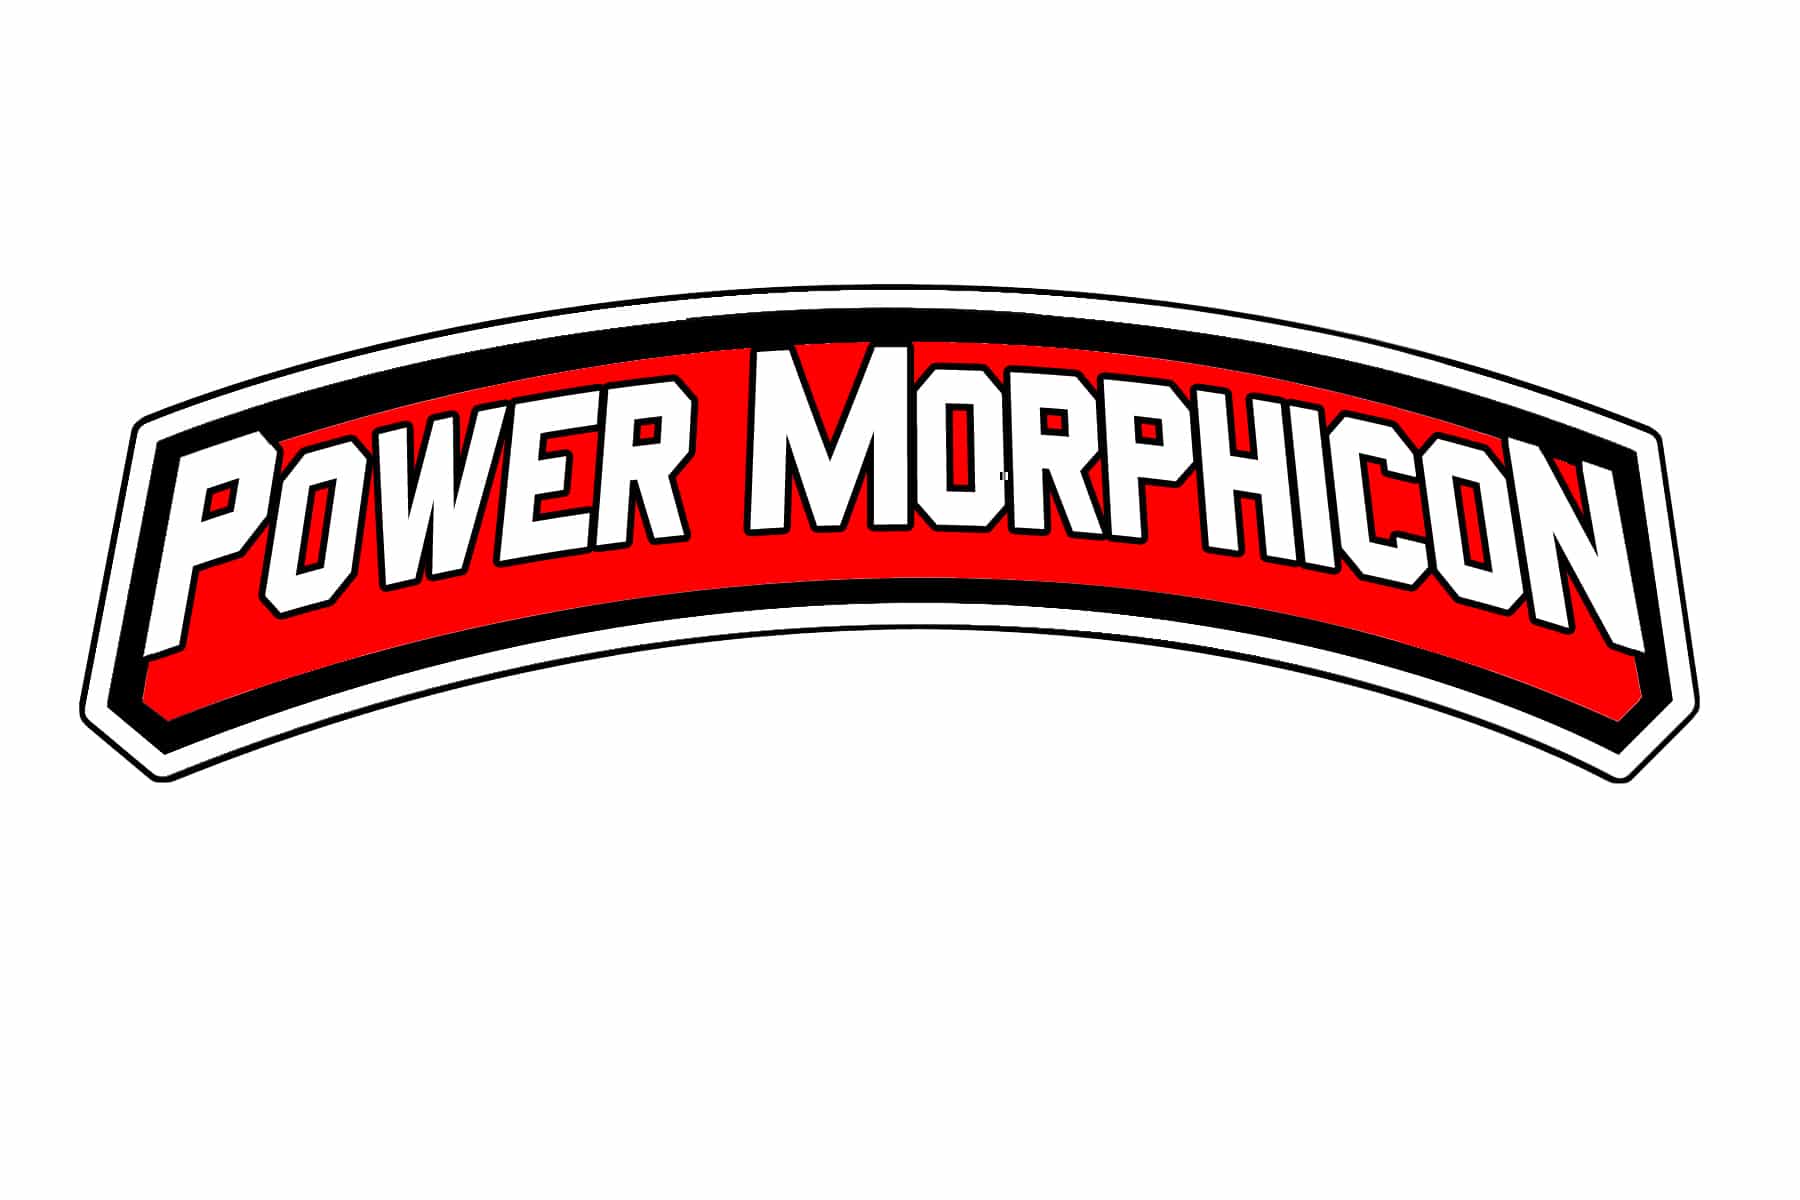 Power Morphicon 2020 Officially Canceled, But Power Morphicon 2021 Announced